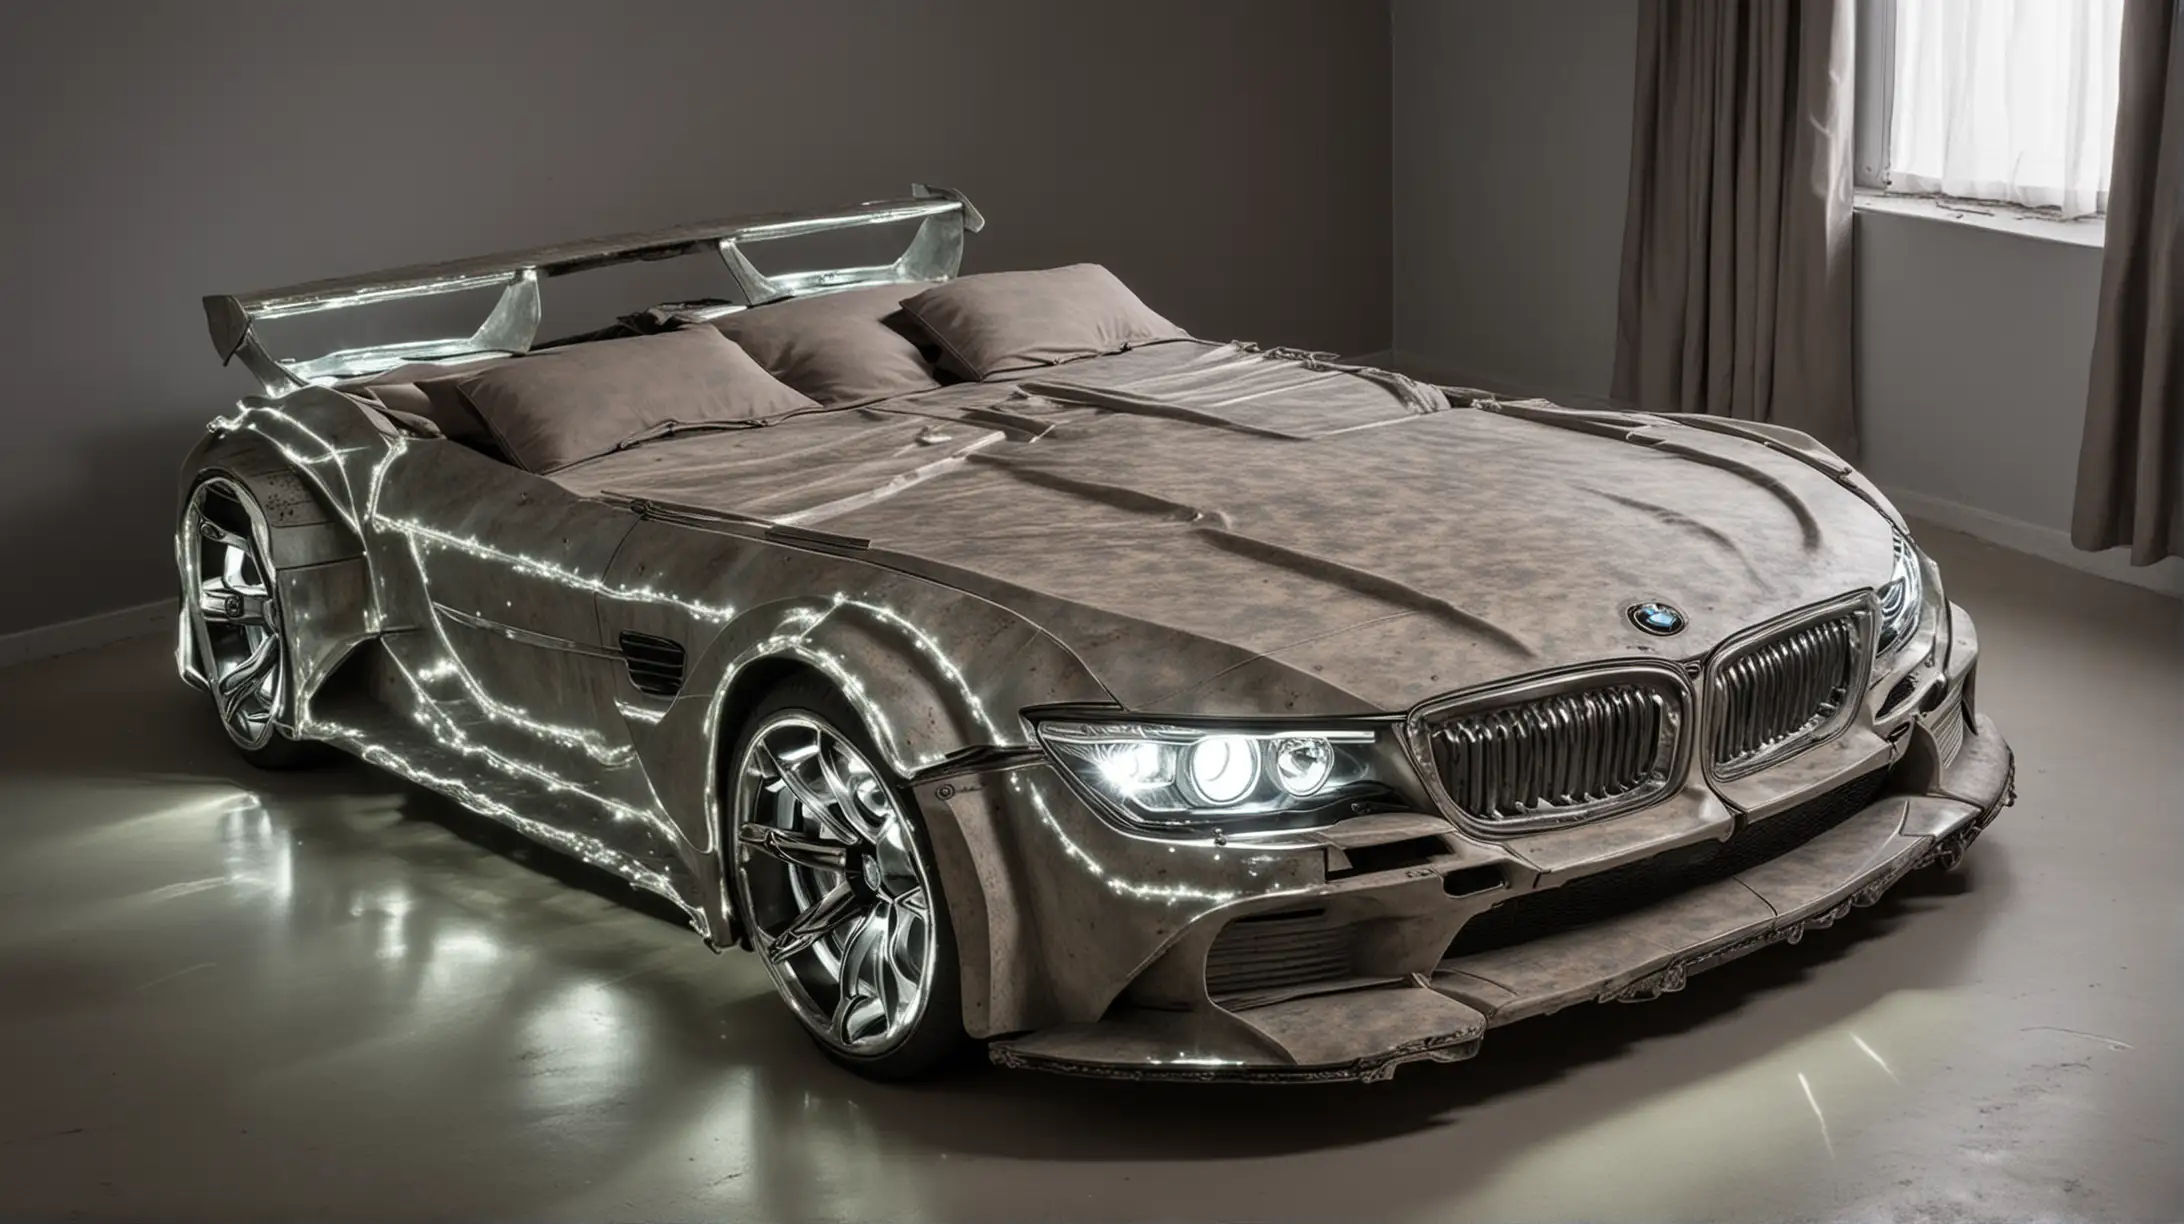 Luxurious BMW CarShaped Double Bed with Illuminated Headlights